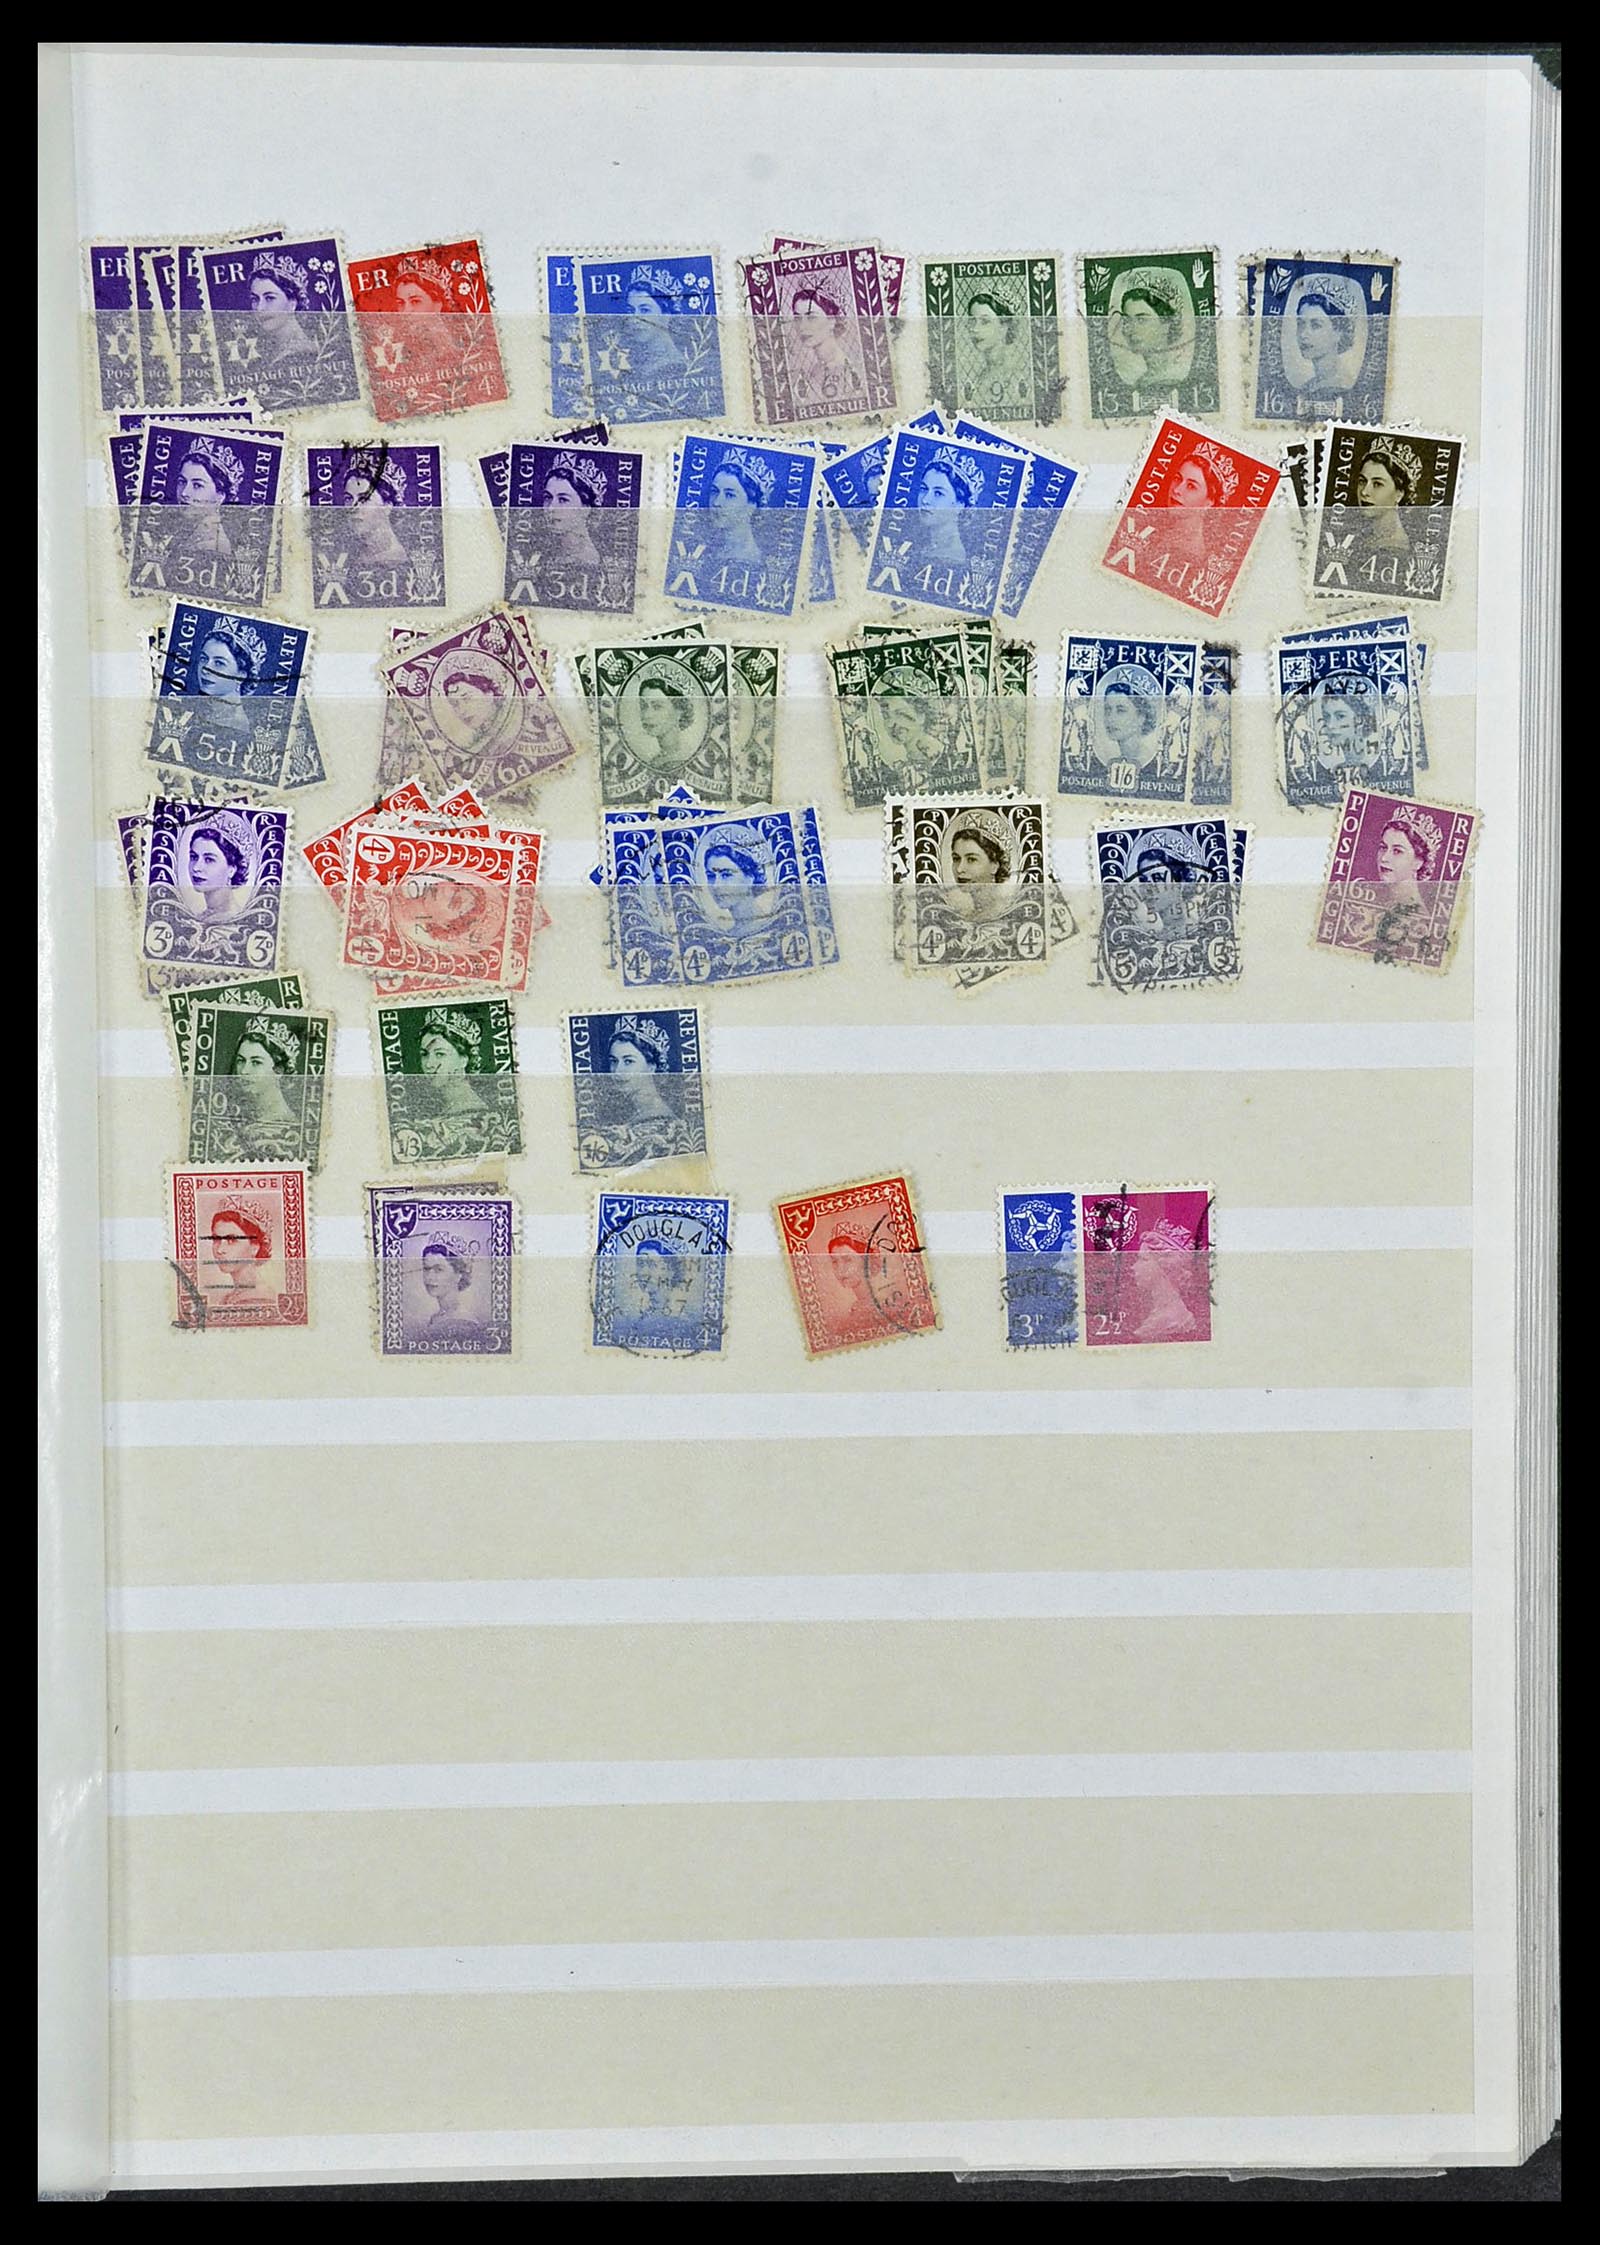 34368 115 - Stamp collection 34368 Great Britain sorting lot 1858-1990.